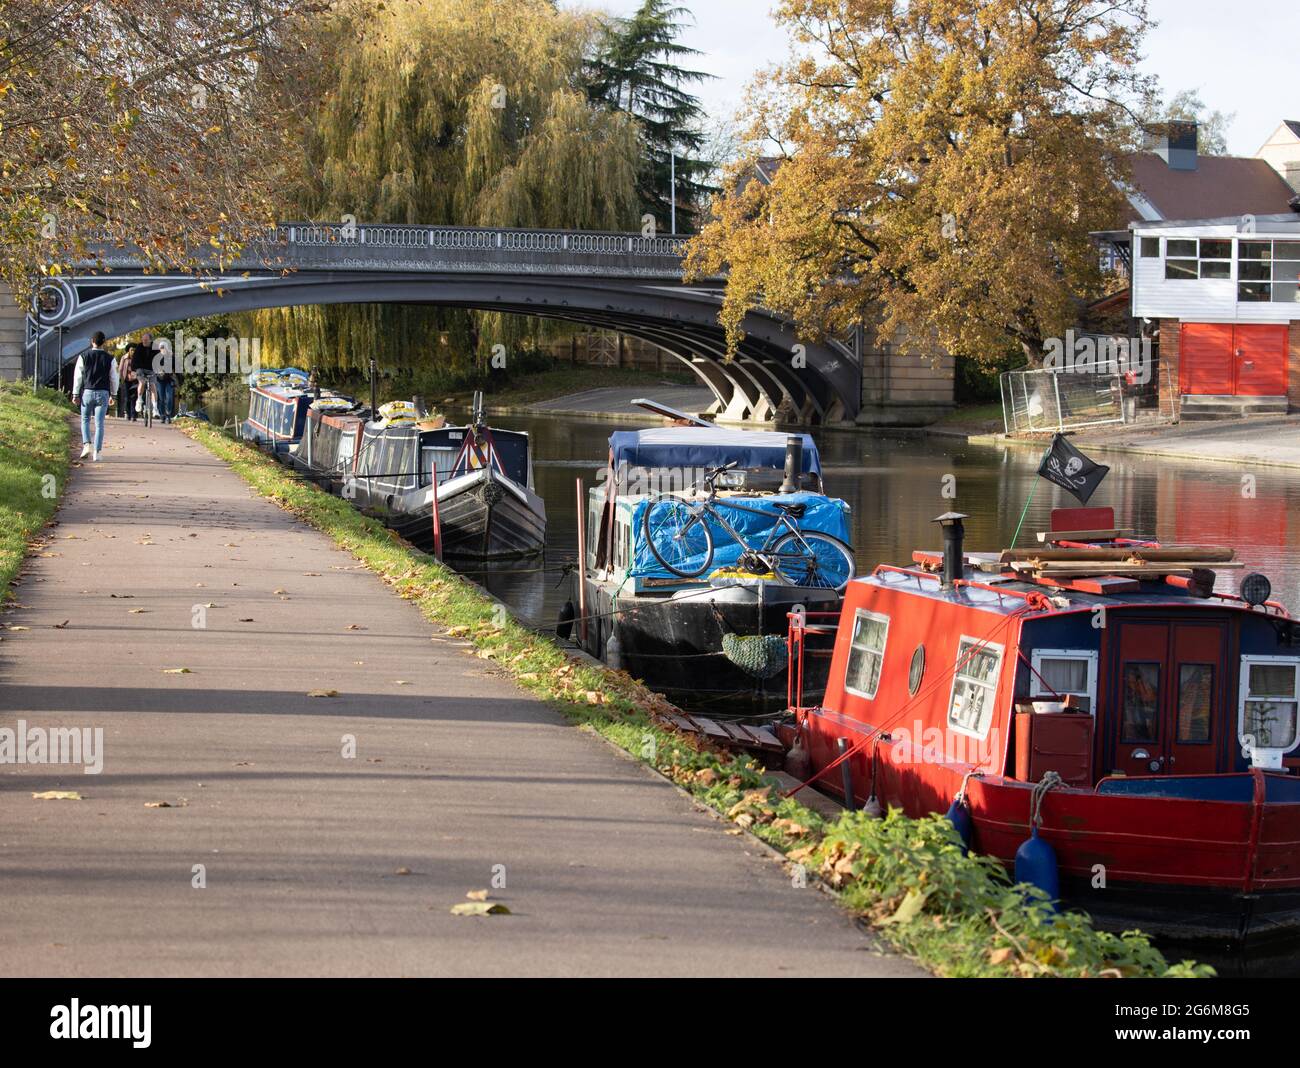 Pretty scene of the River Cam in Cambridge with colourful boats moored along the river bank with people walking along riverside path Stock Photo